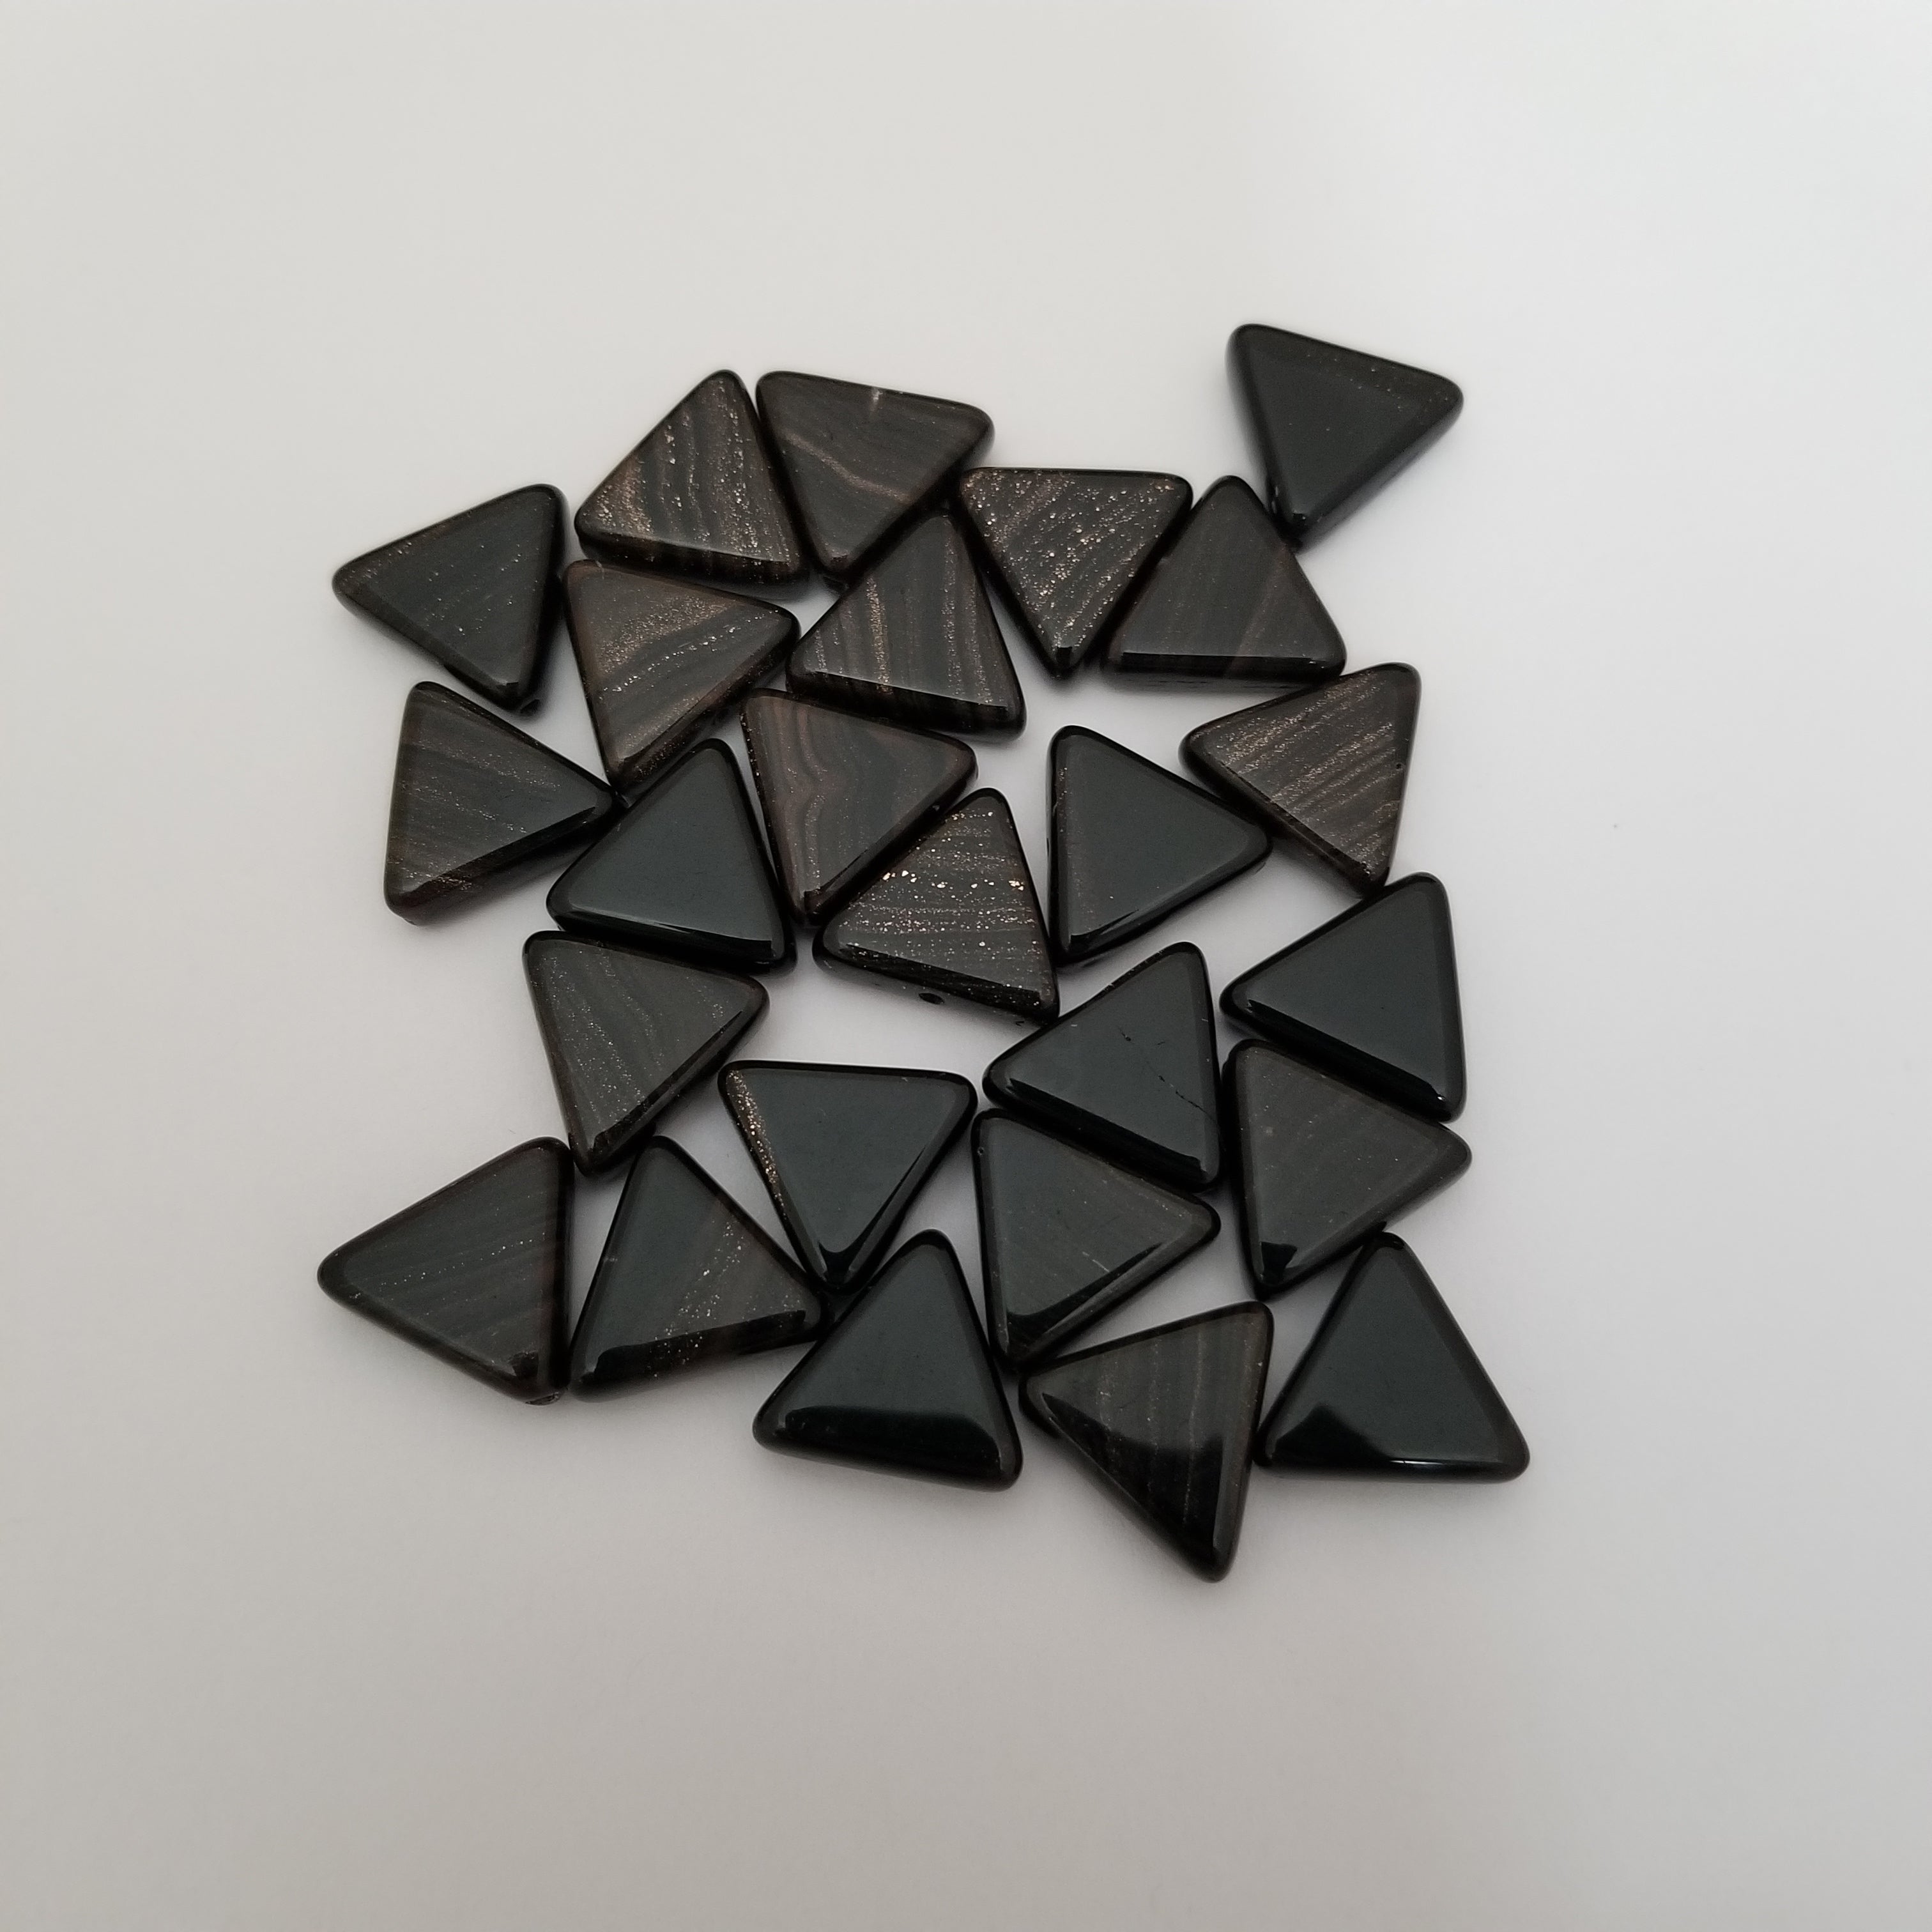 12mm Vintage Black "Gold Stone" Glass Triangles